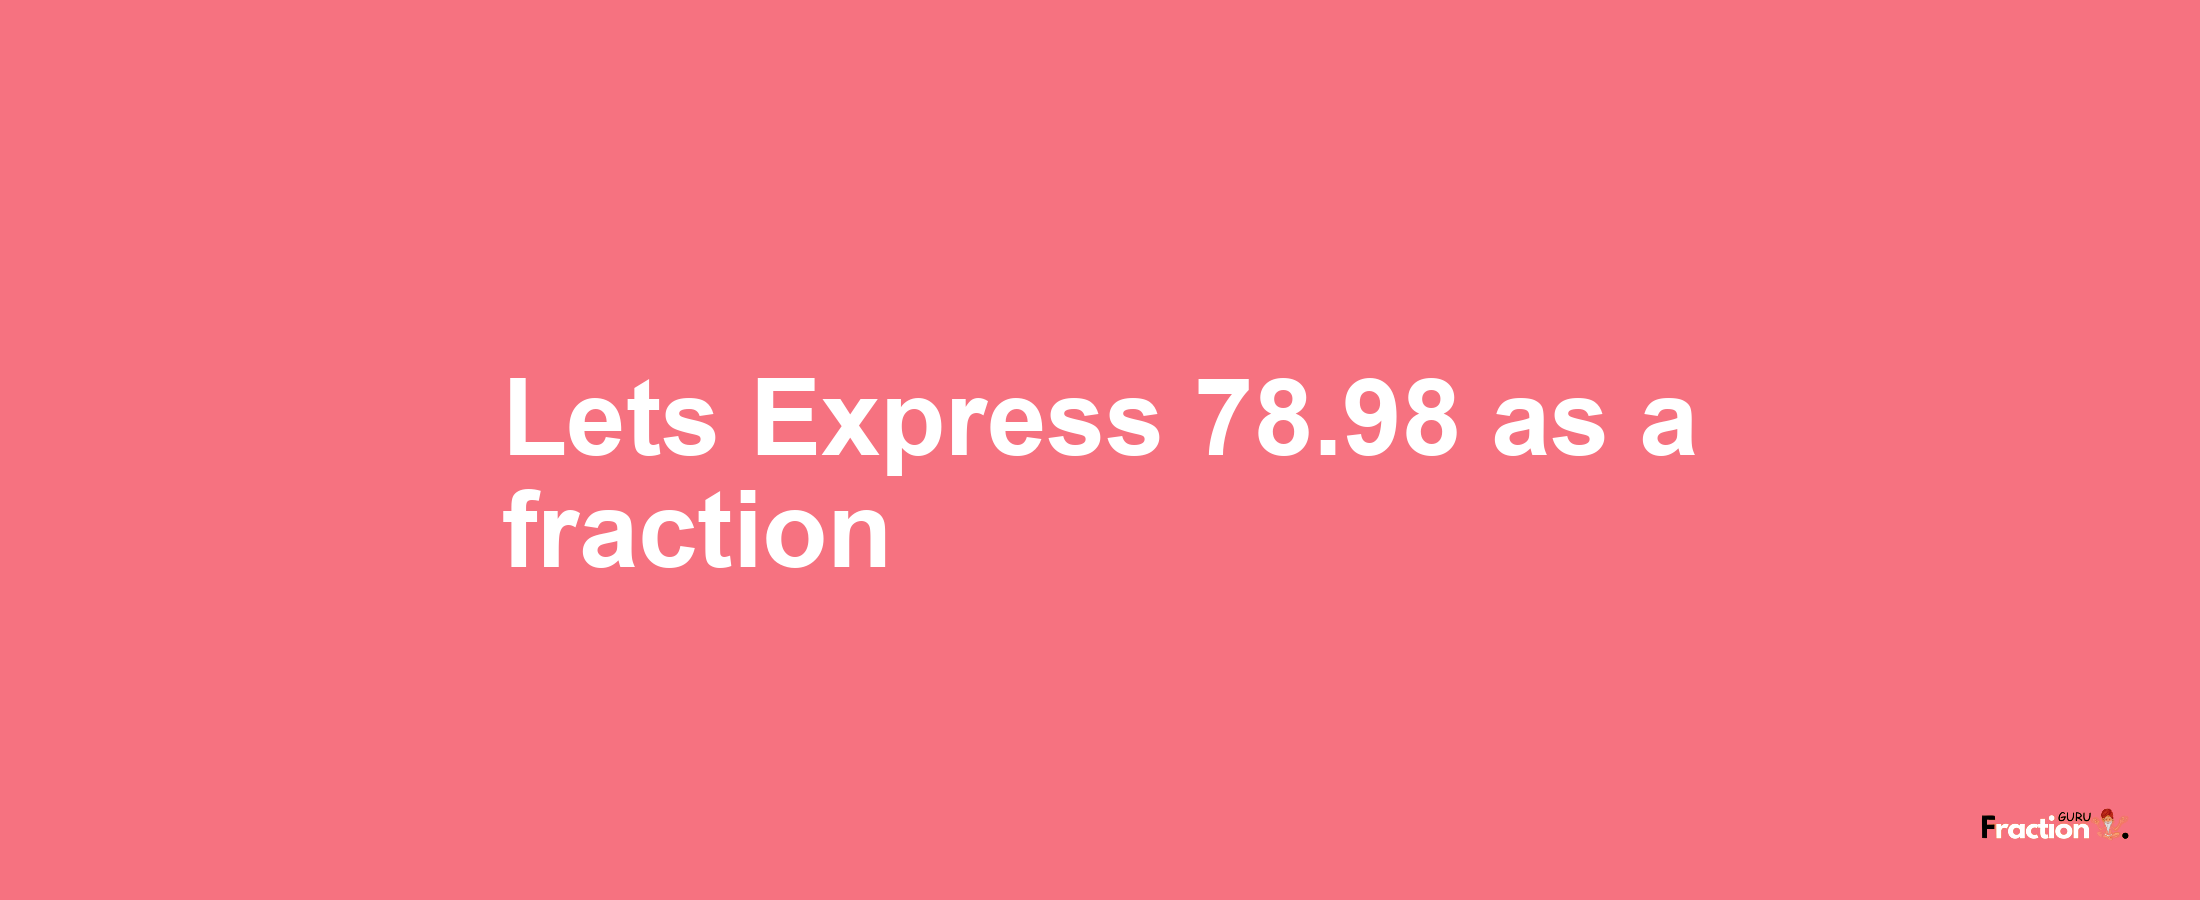 Lets Express 78.98 as afraction